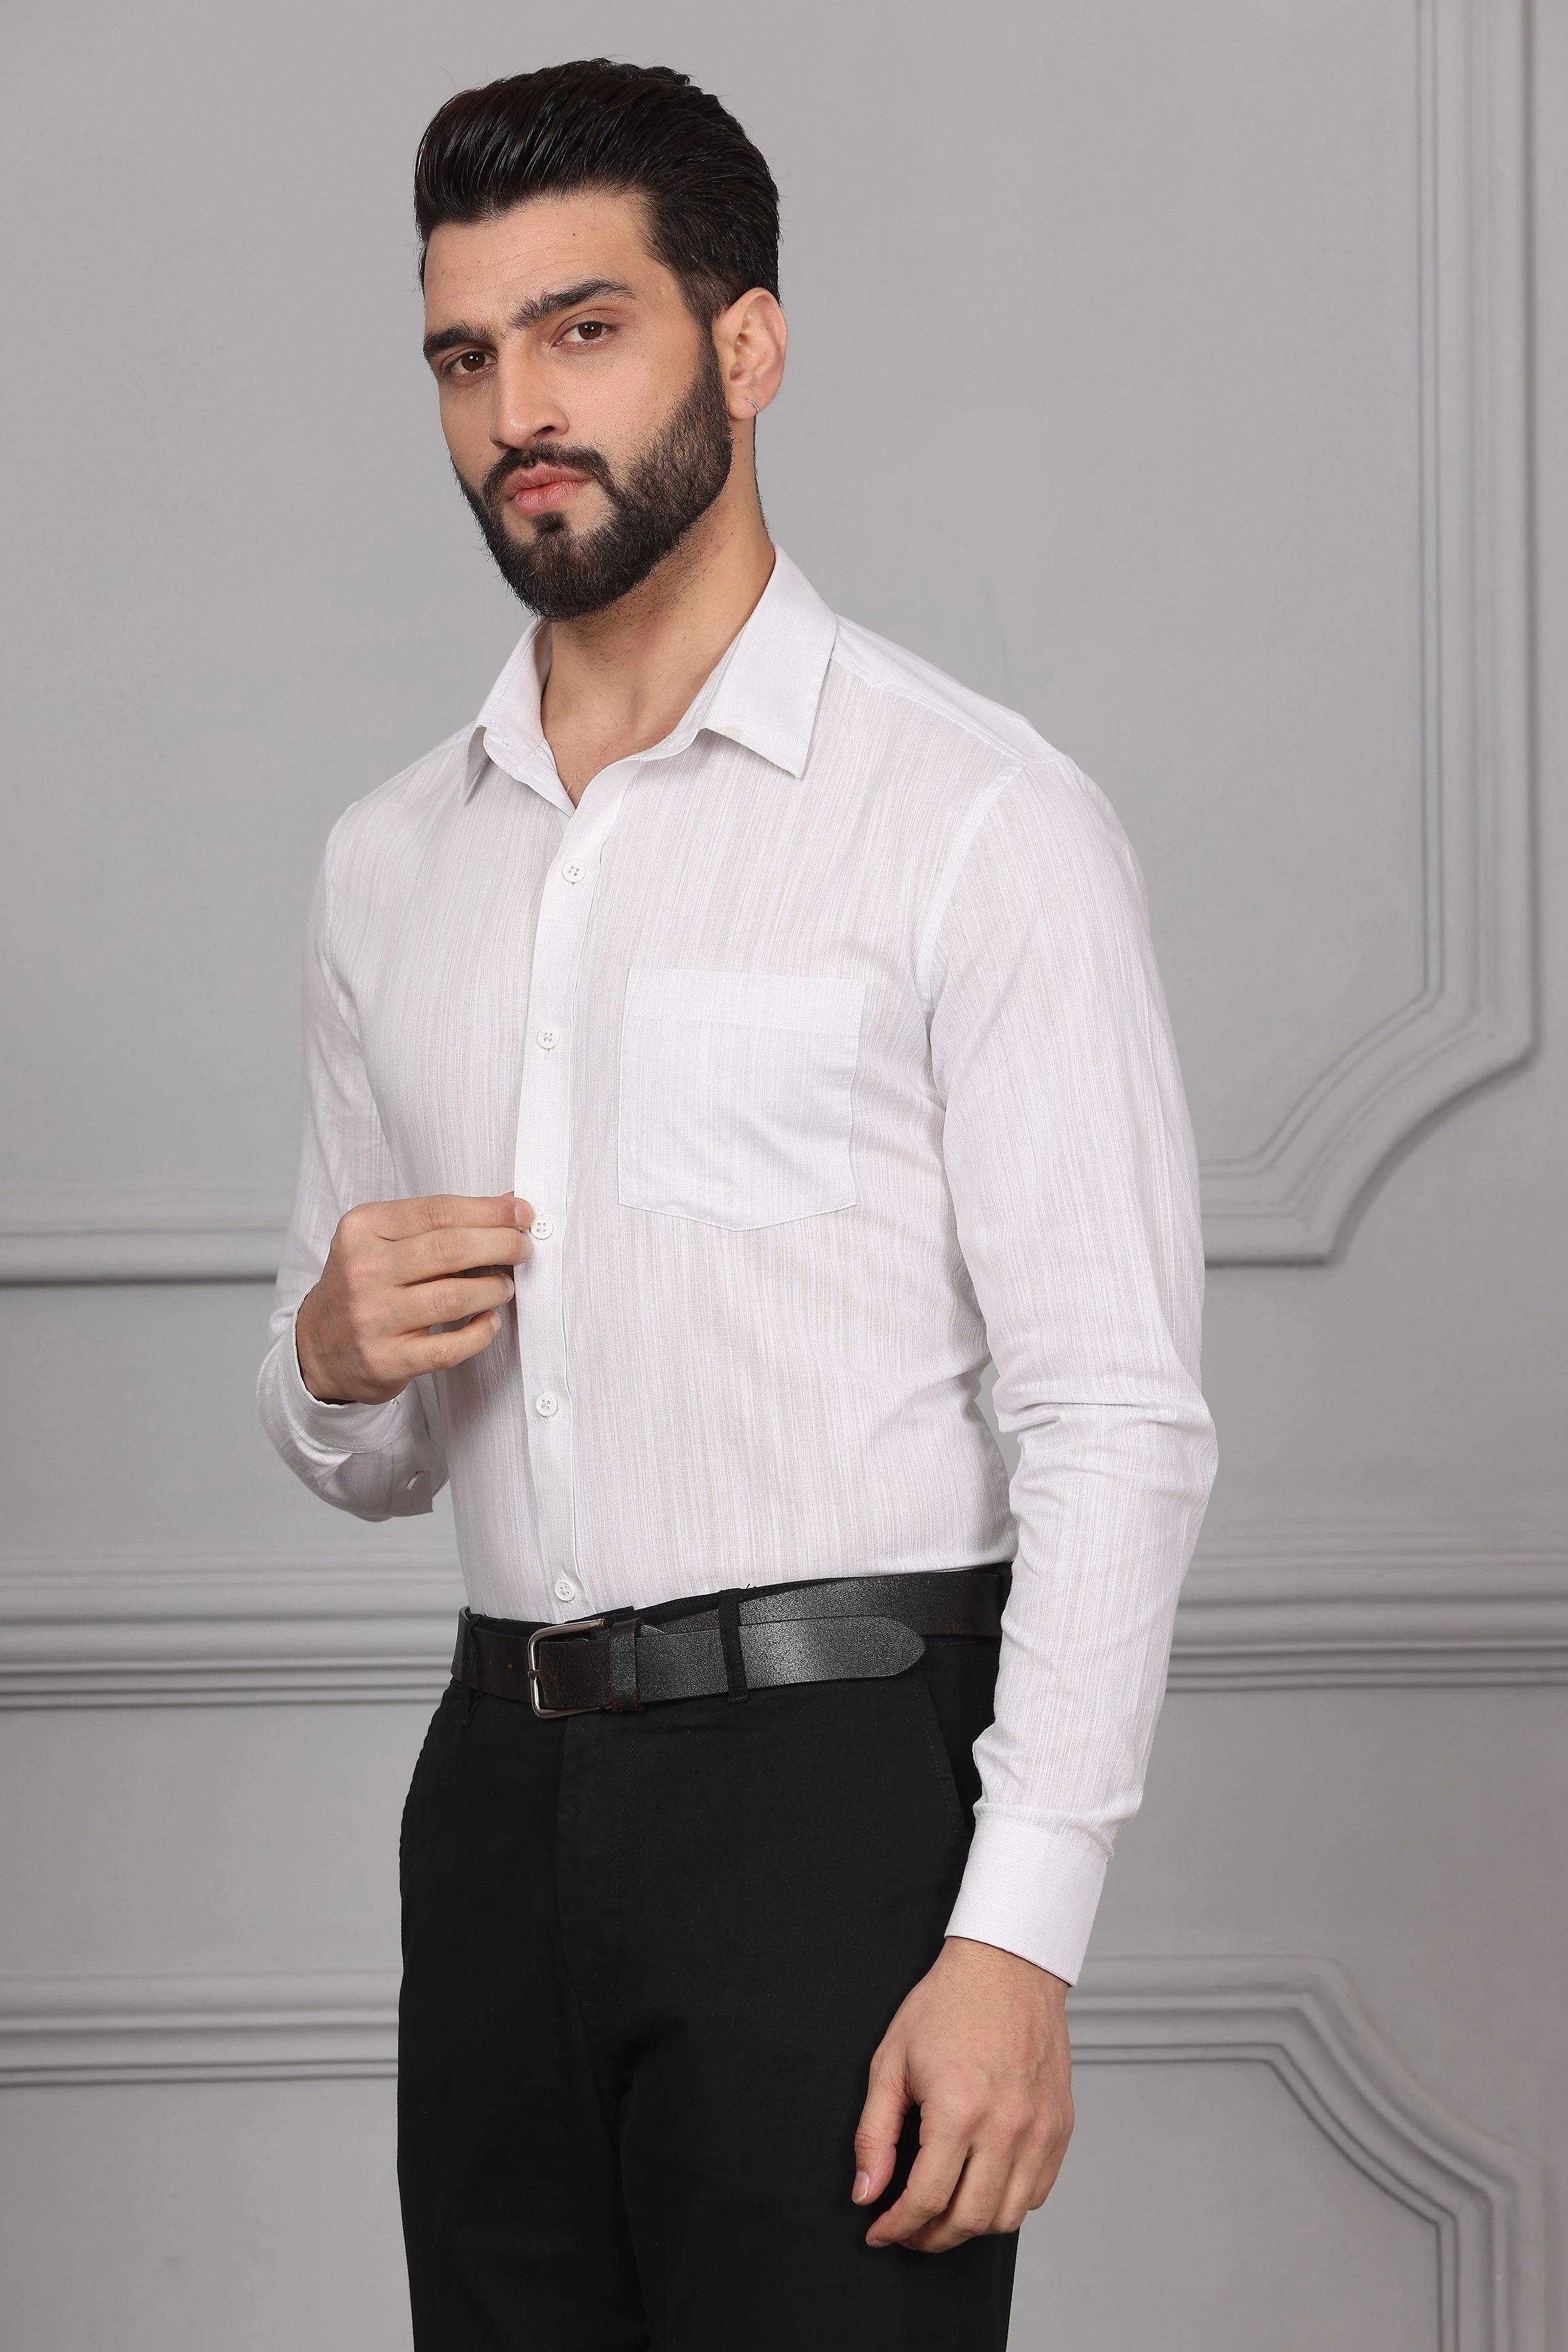 Textured White Grey Business Formal Cotton Shirt-S-1